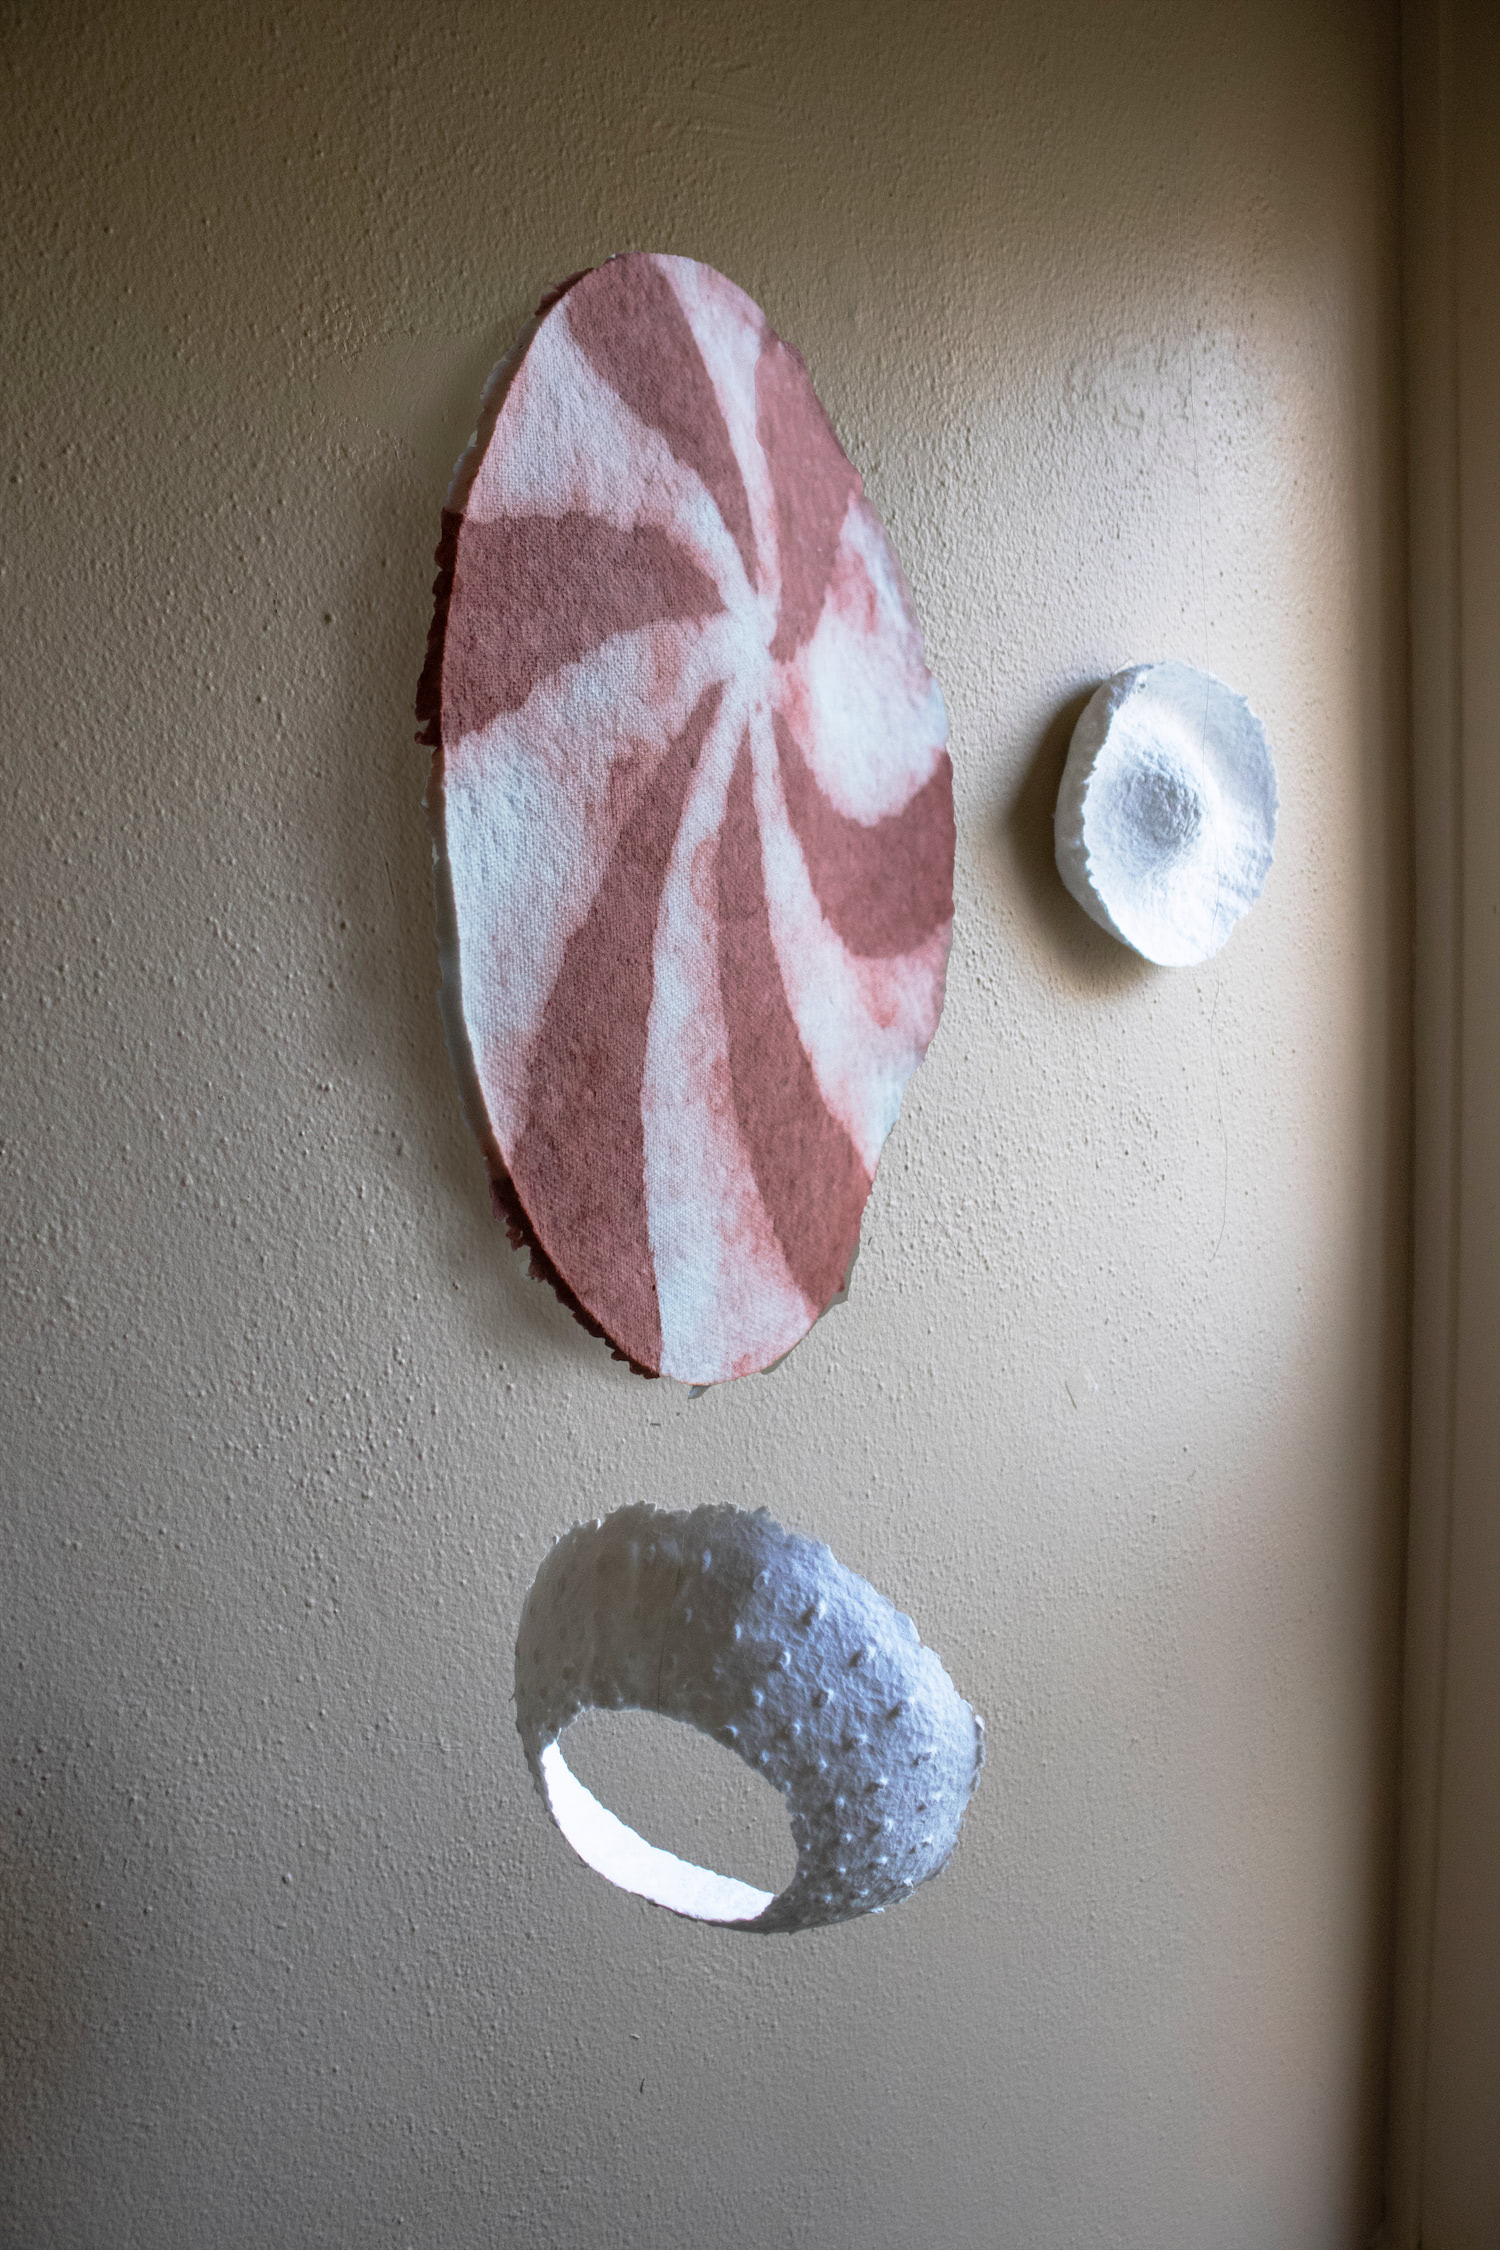 Angled view of multiple floating paper objects. Circular objects and motion. Red and white palette. Surreal Reality.